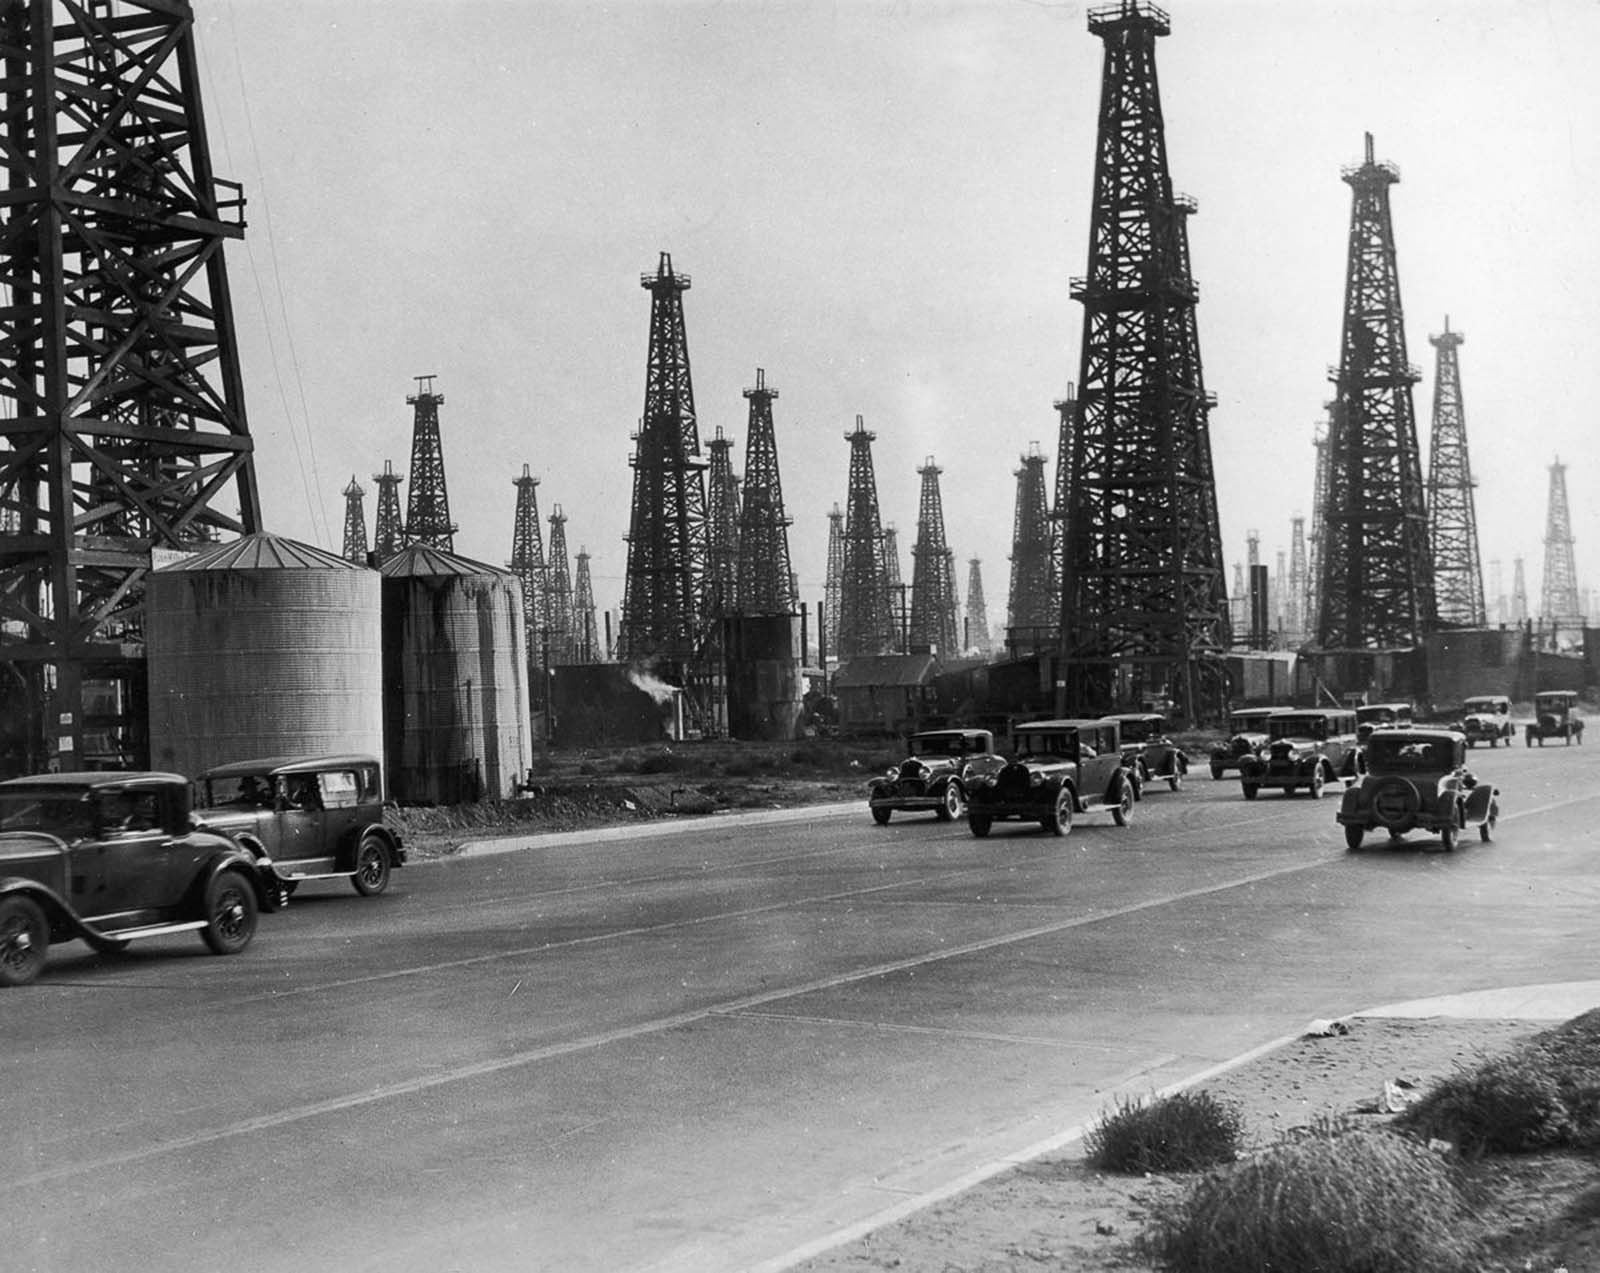 The Signal Hill oilfield in southern California, 1930